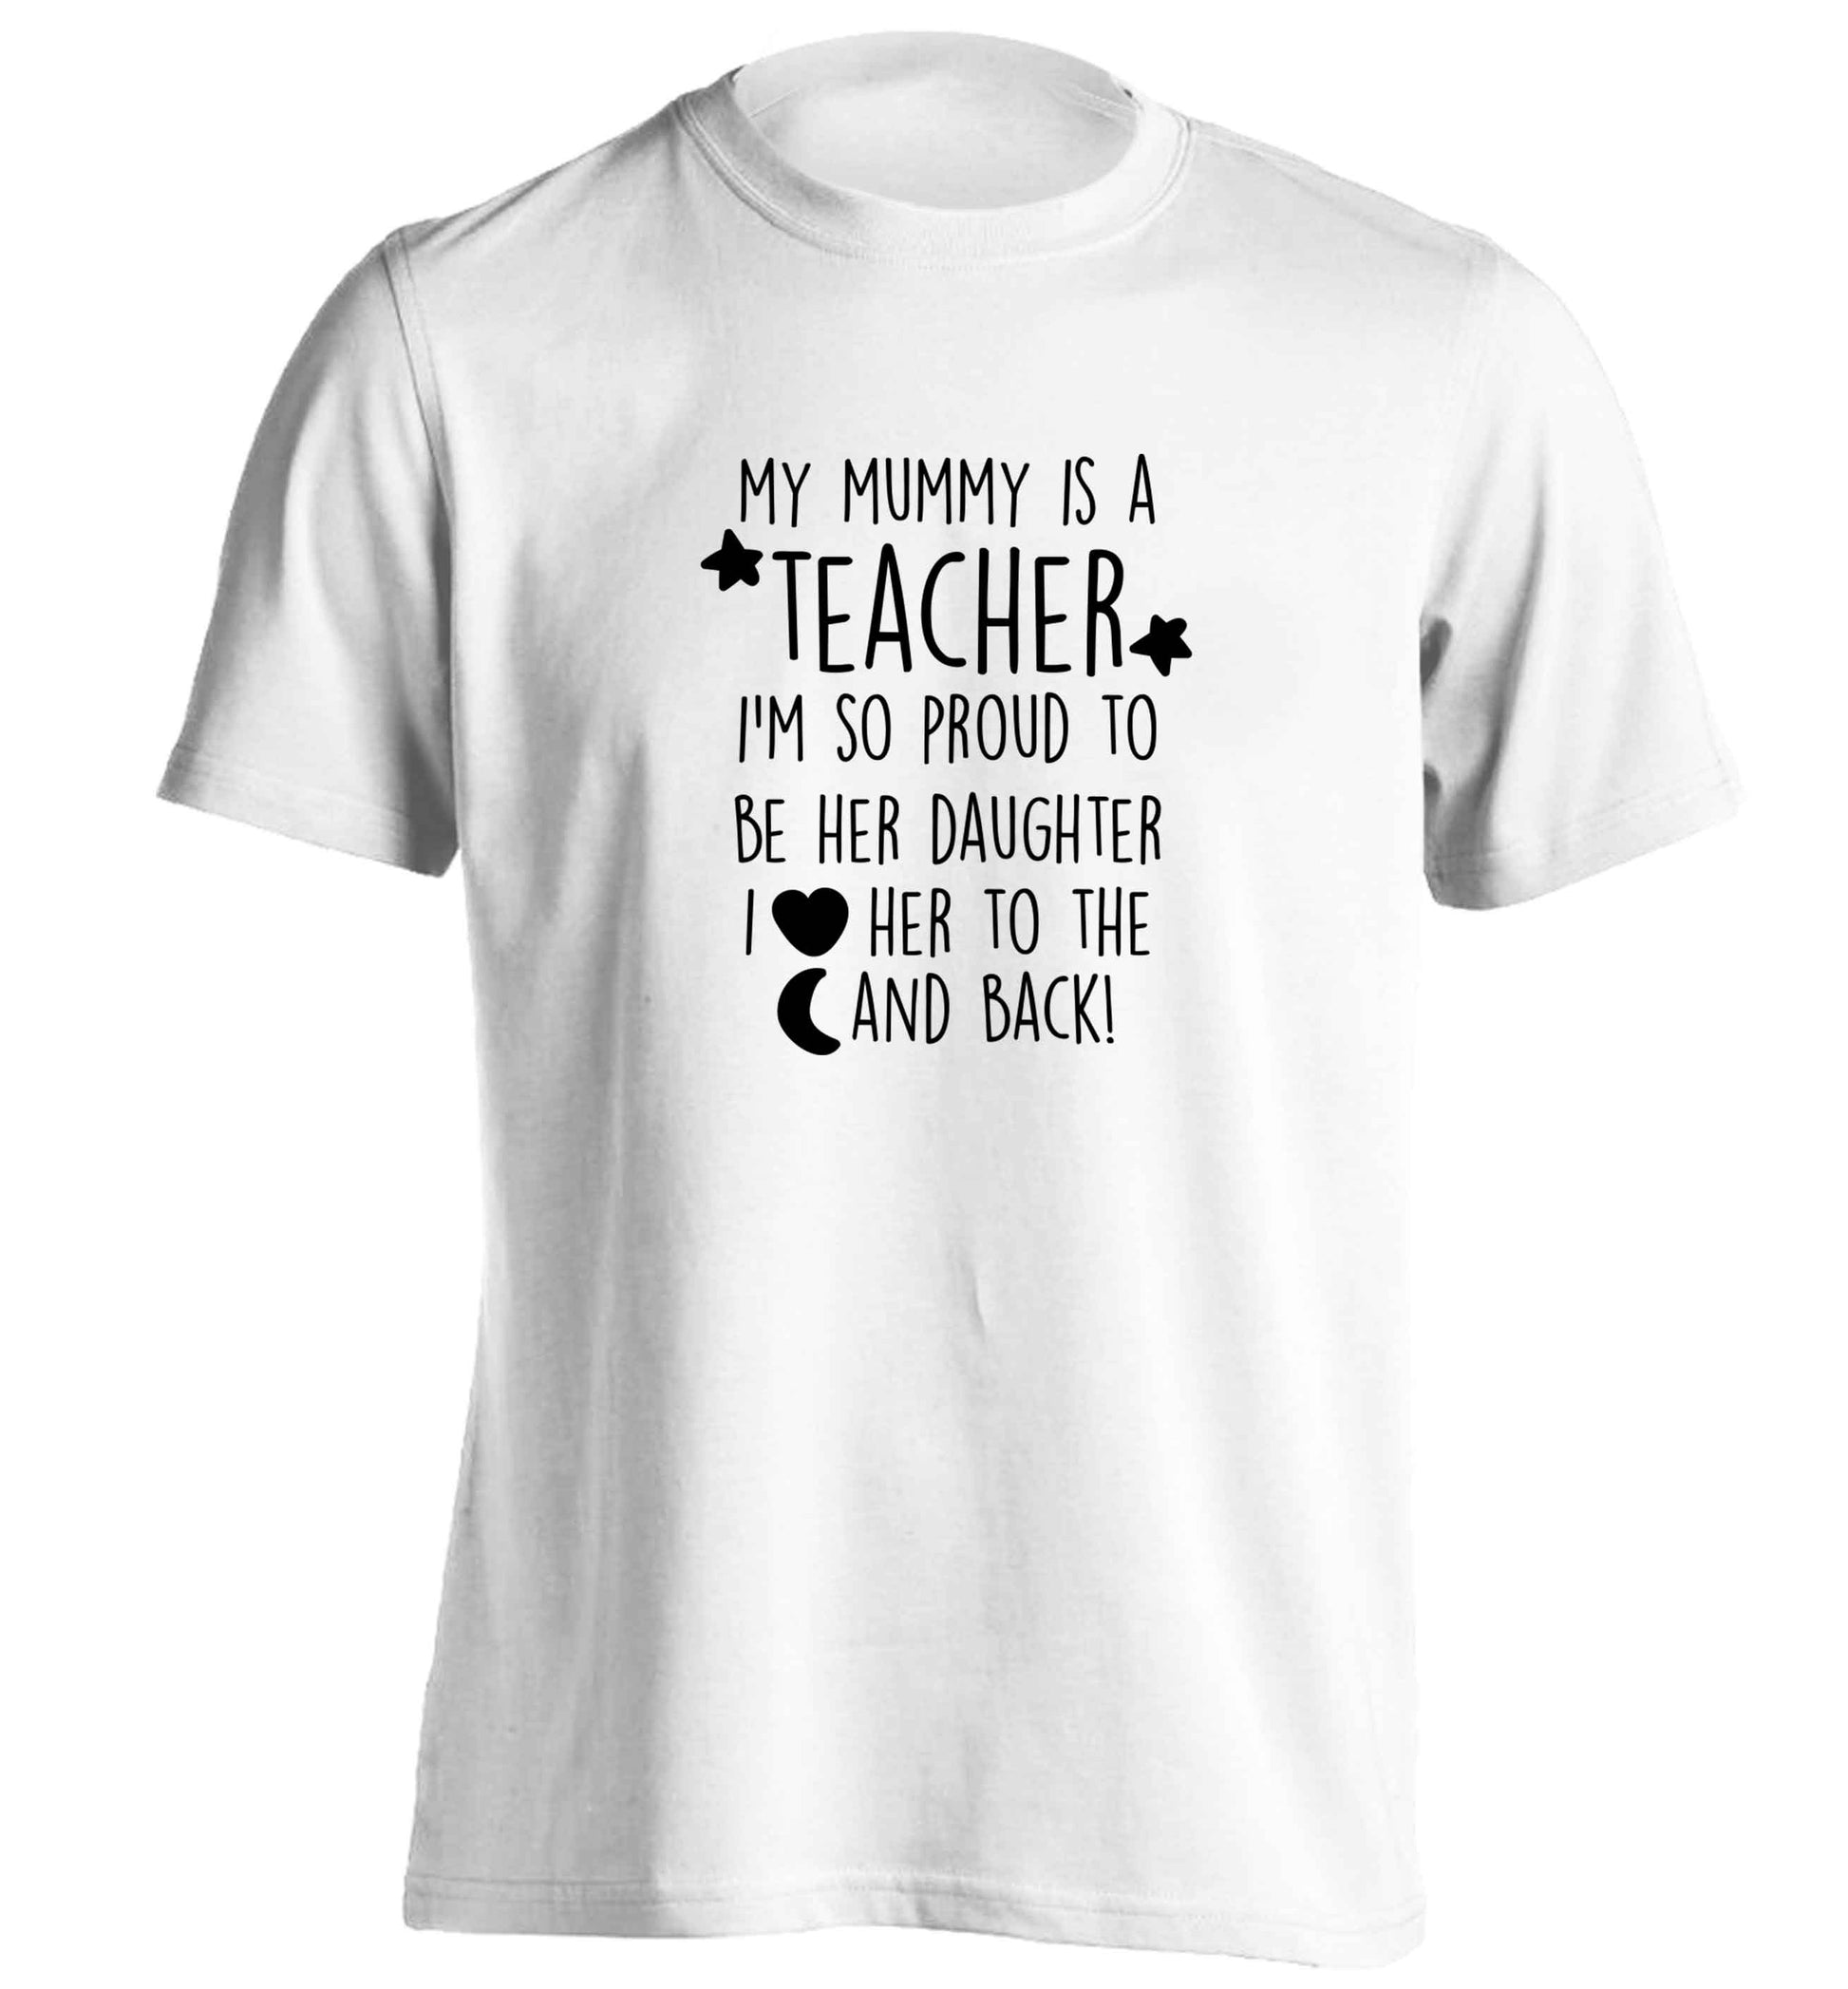 My mummy is a teacher I'm so proud to be her daughter I love her to the moon and back adults unisex white Tshirt 2XL